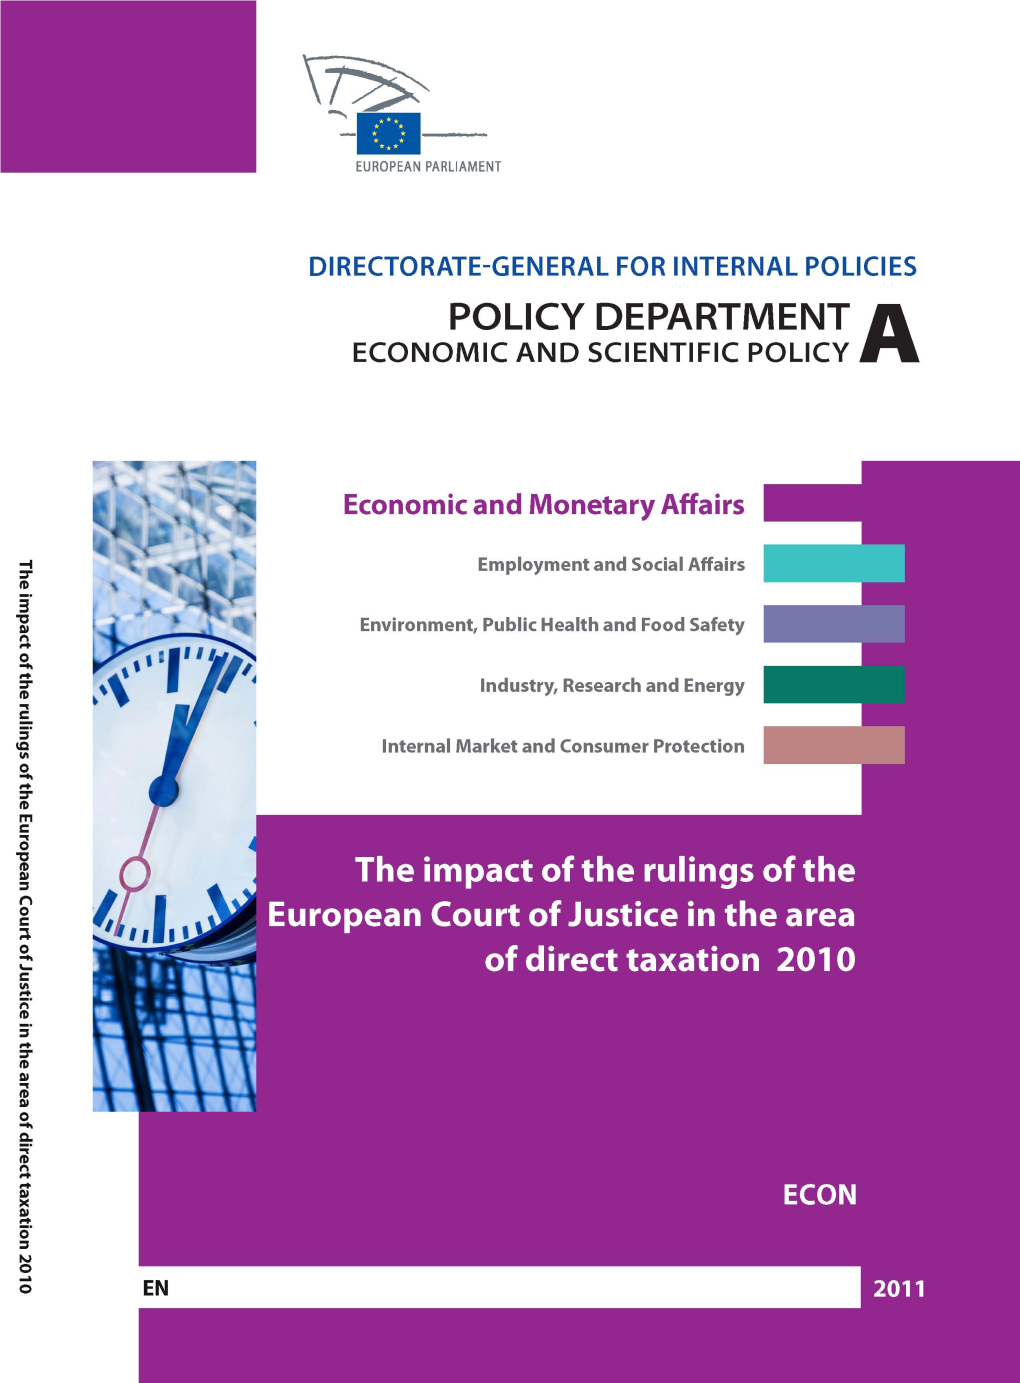 The Impact of the Rulings of the European Court of Justice in the Area of Direct Taxation 2010